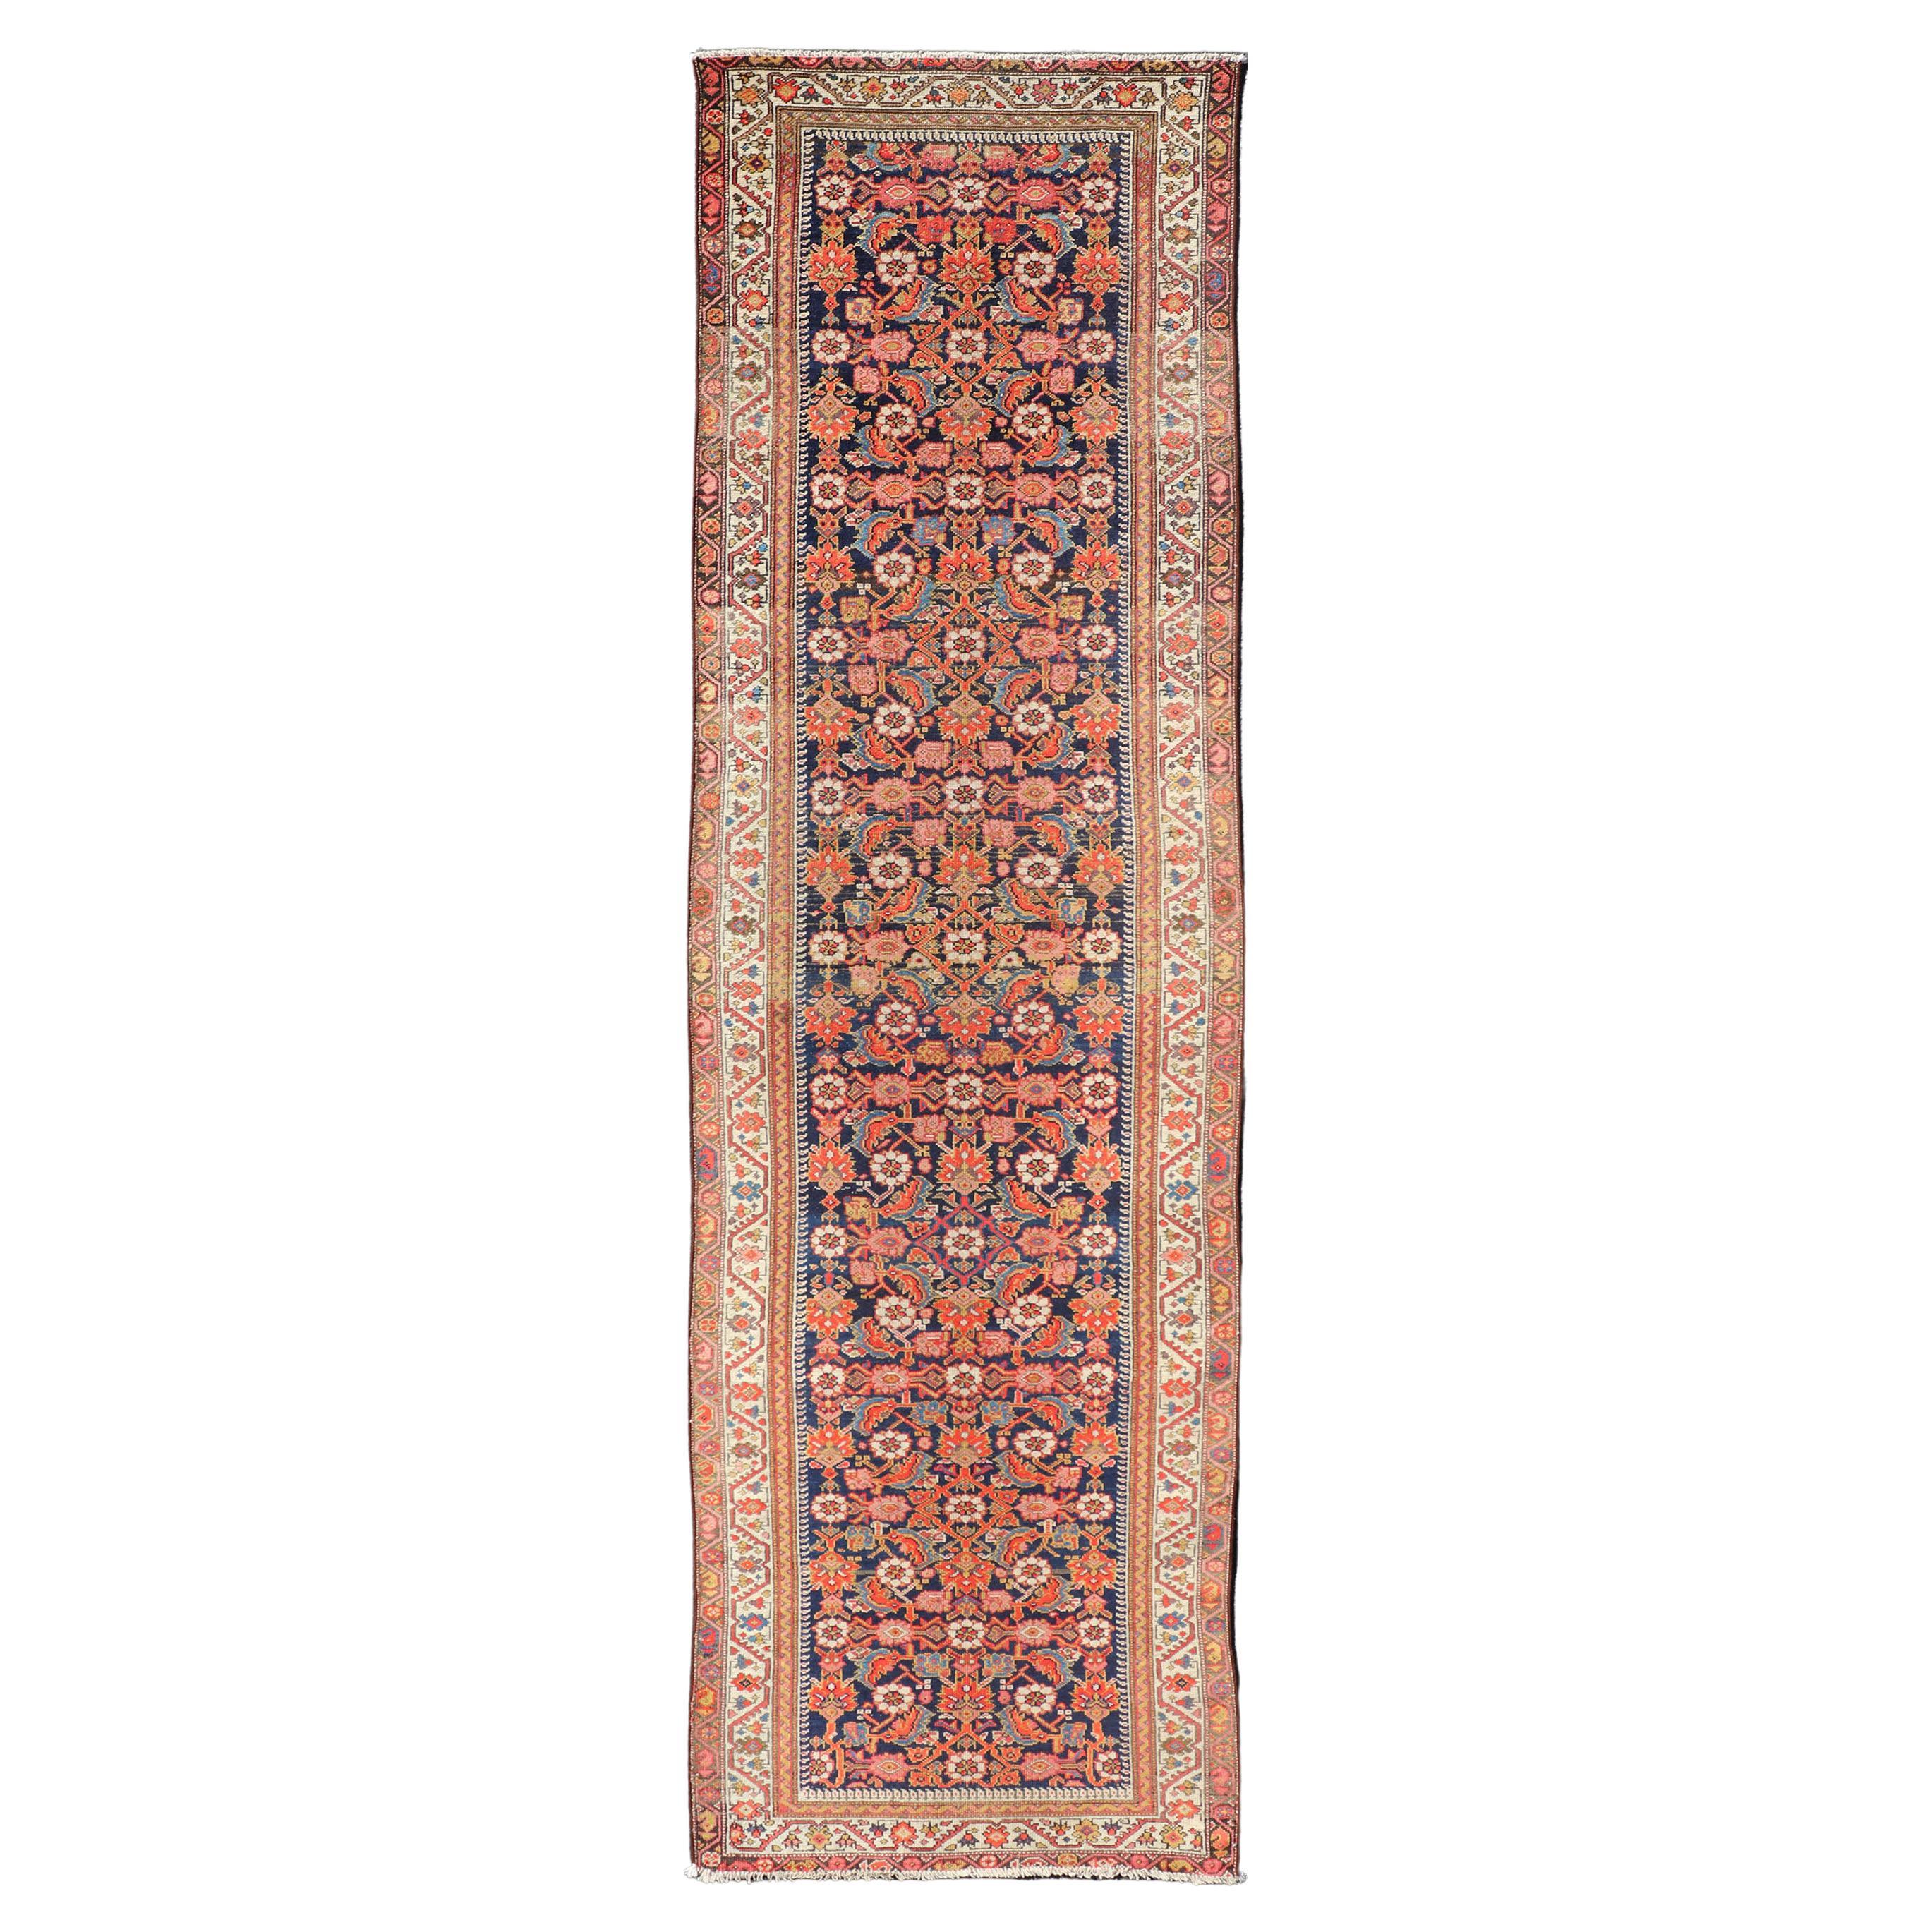 Antique Malayer Runner with All-Over Herati Design and Beautiful Colors